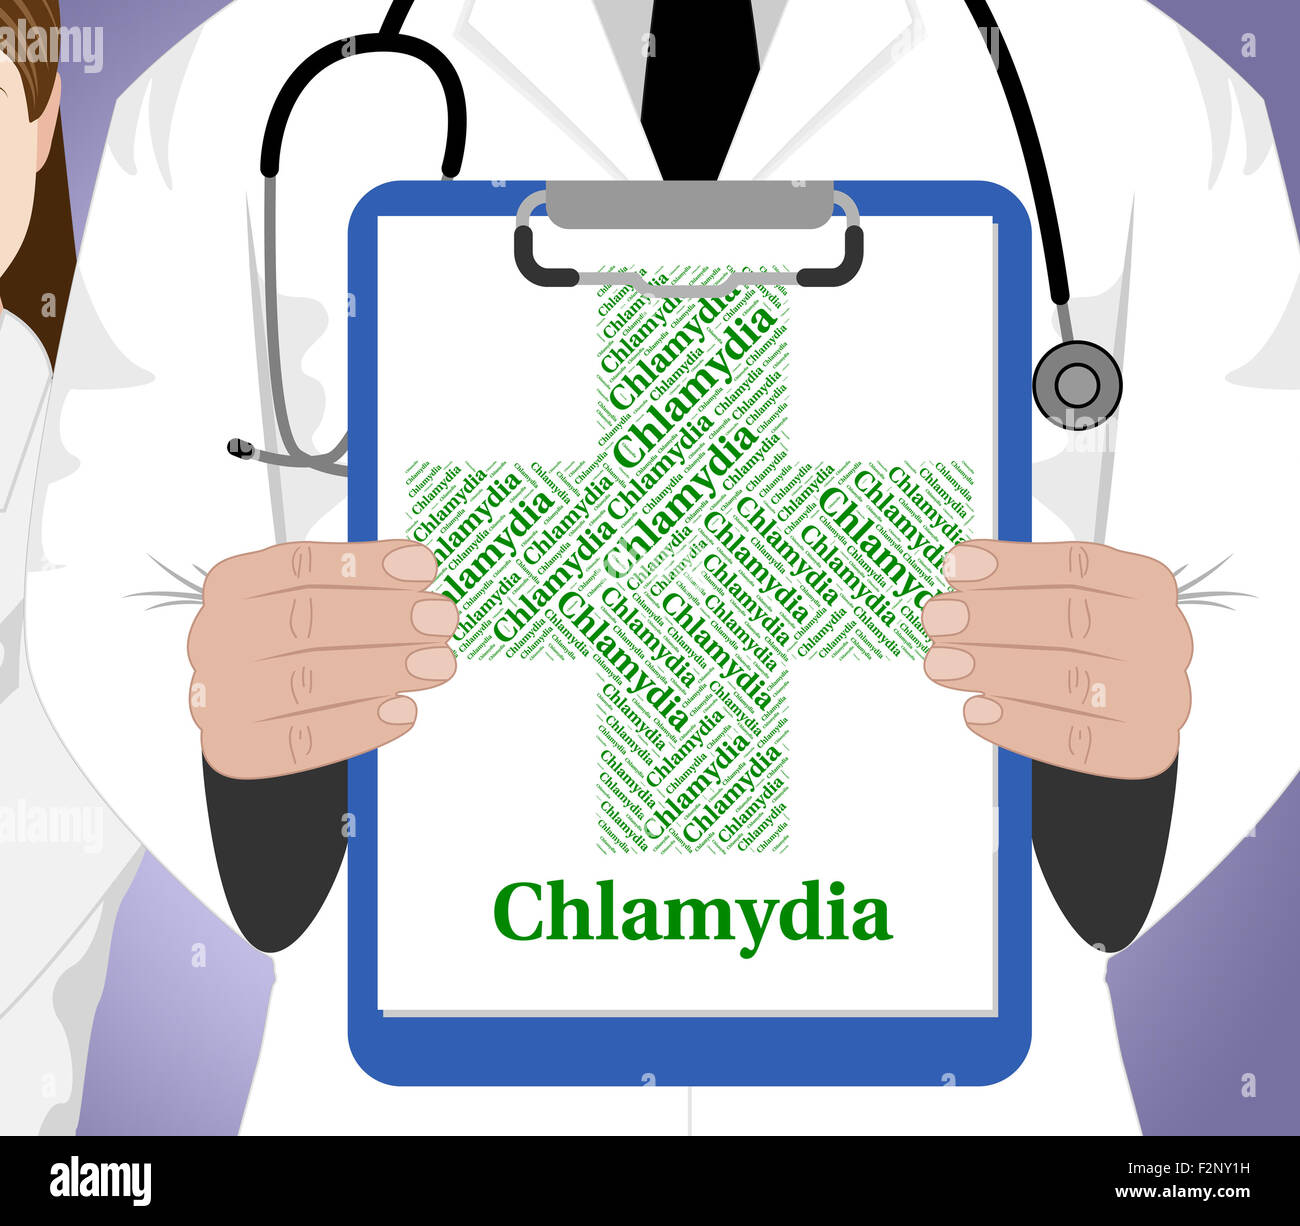 Chlamydia Word Showing Sexually Transmitted Disease And Venus's Curse Stock Photo